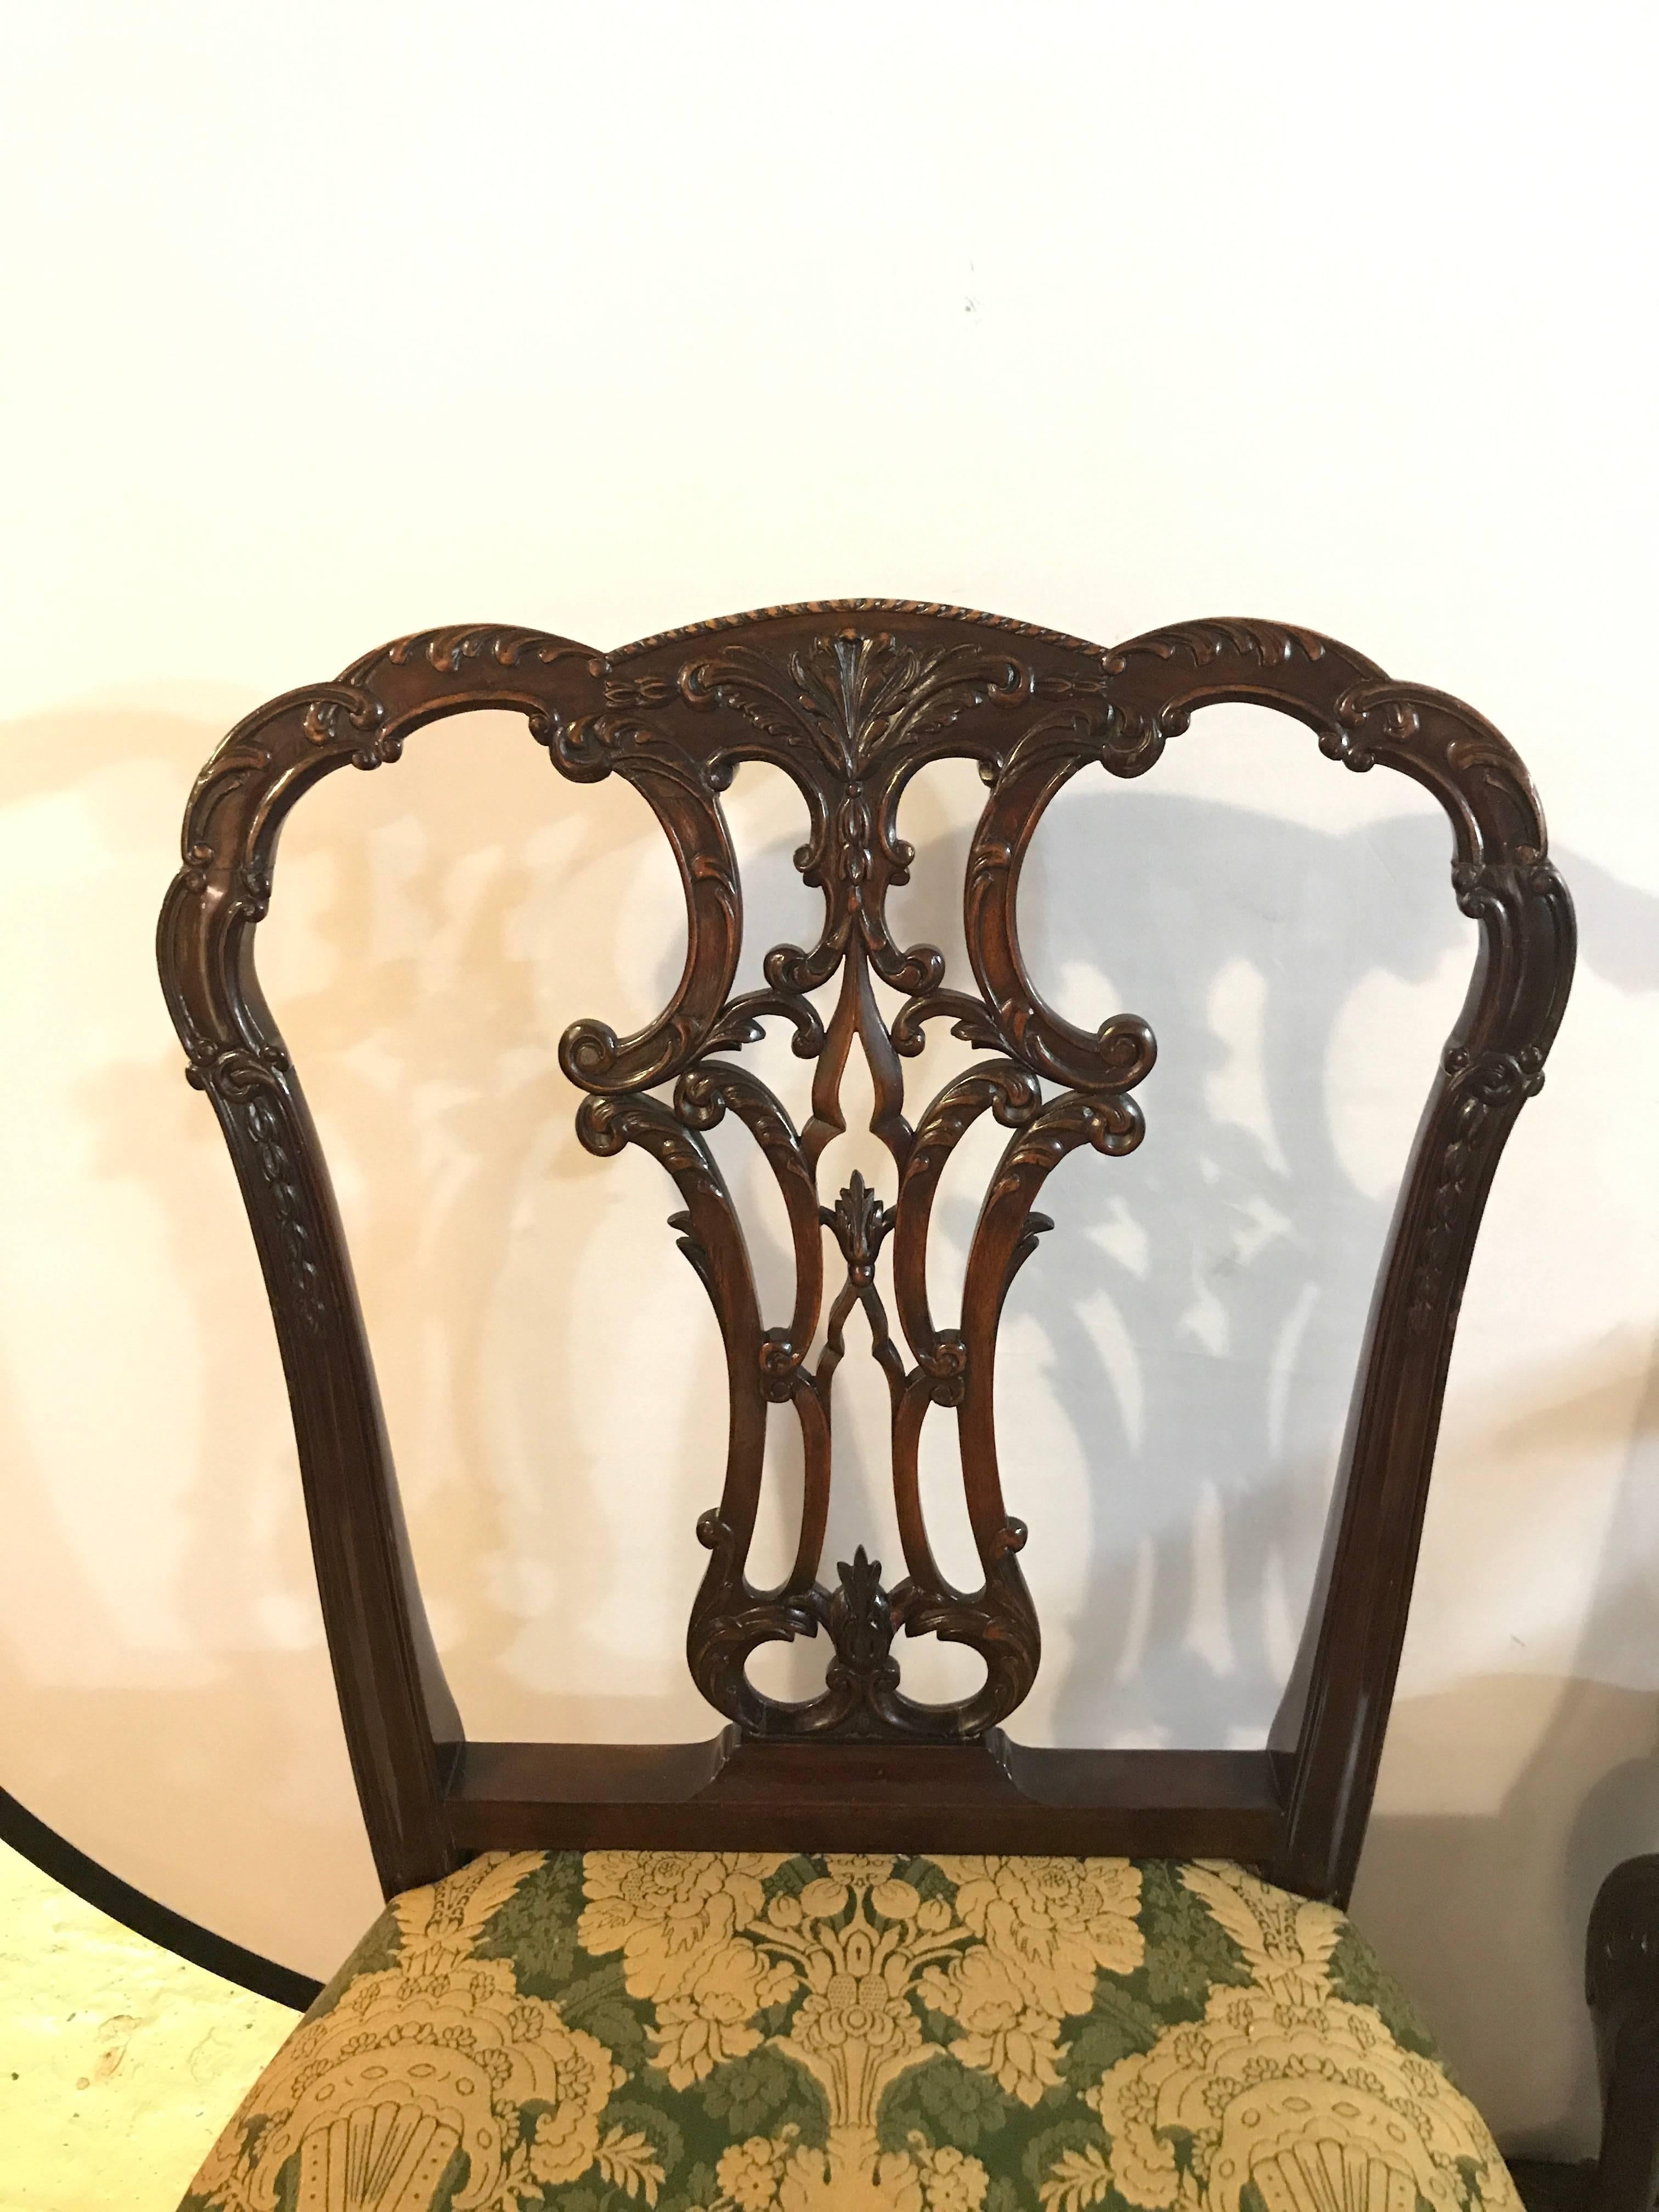 Set of eight Georgian style solid mahogany dining room chairs. Custom-made possibly Baker or Schmieg and Kotzian. This fine set consists of two arm and six side chairs each having a finely carved ball and claw foot leading to a cabriole leg. The